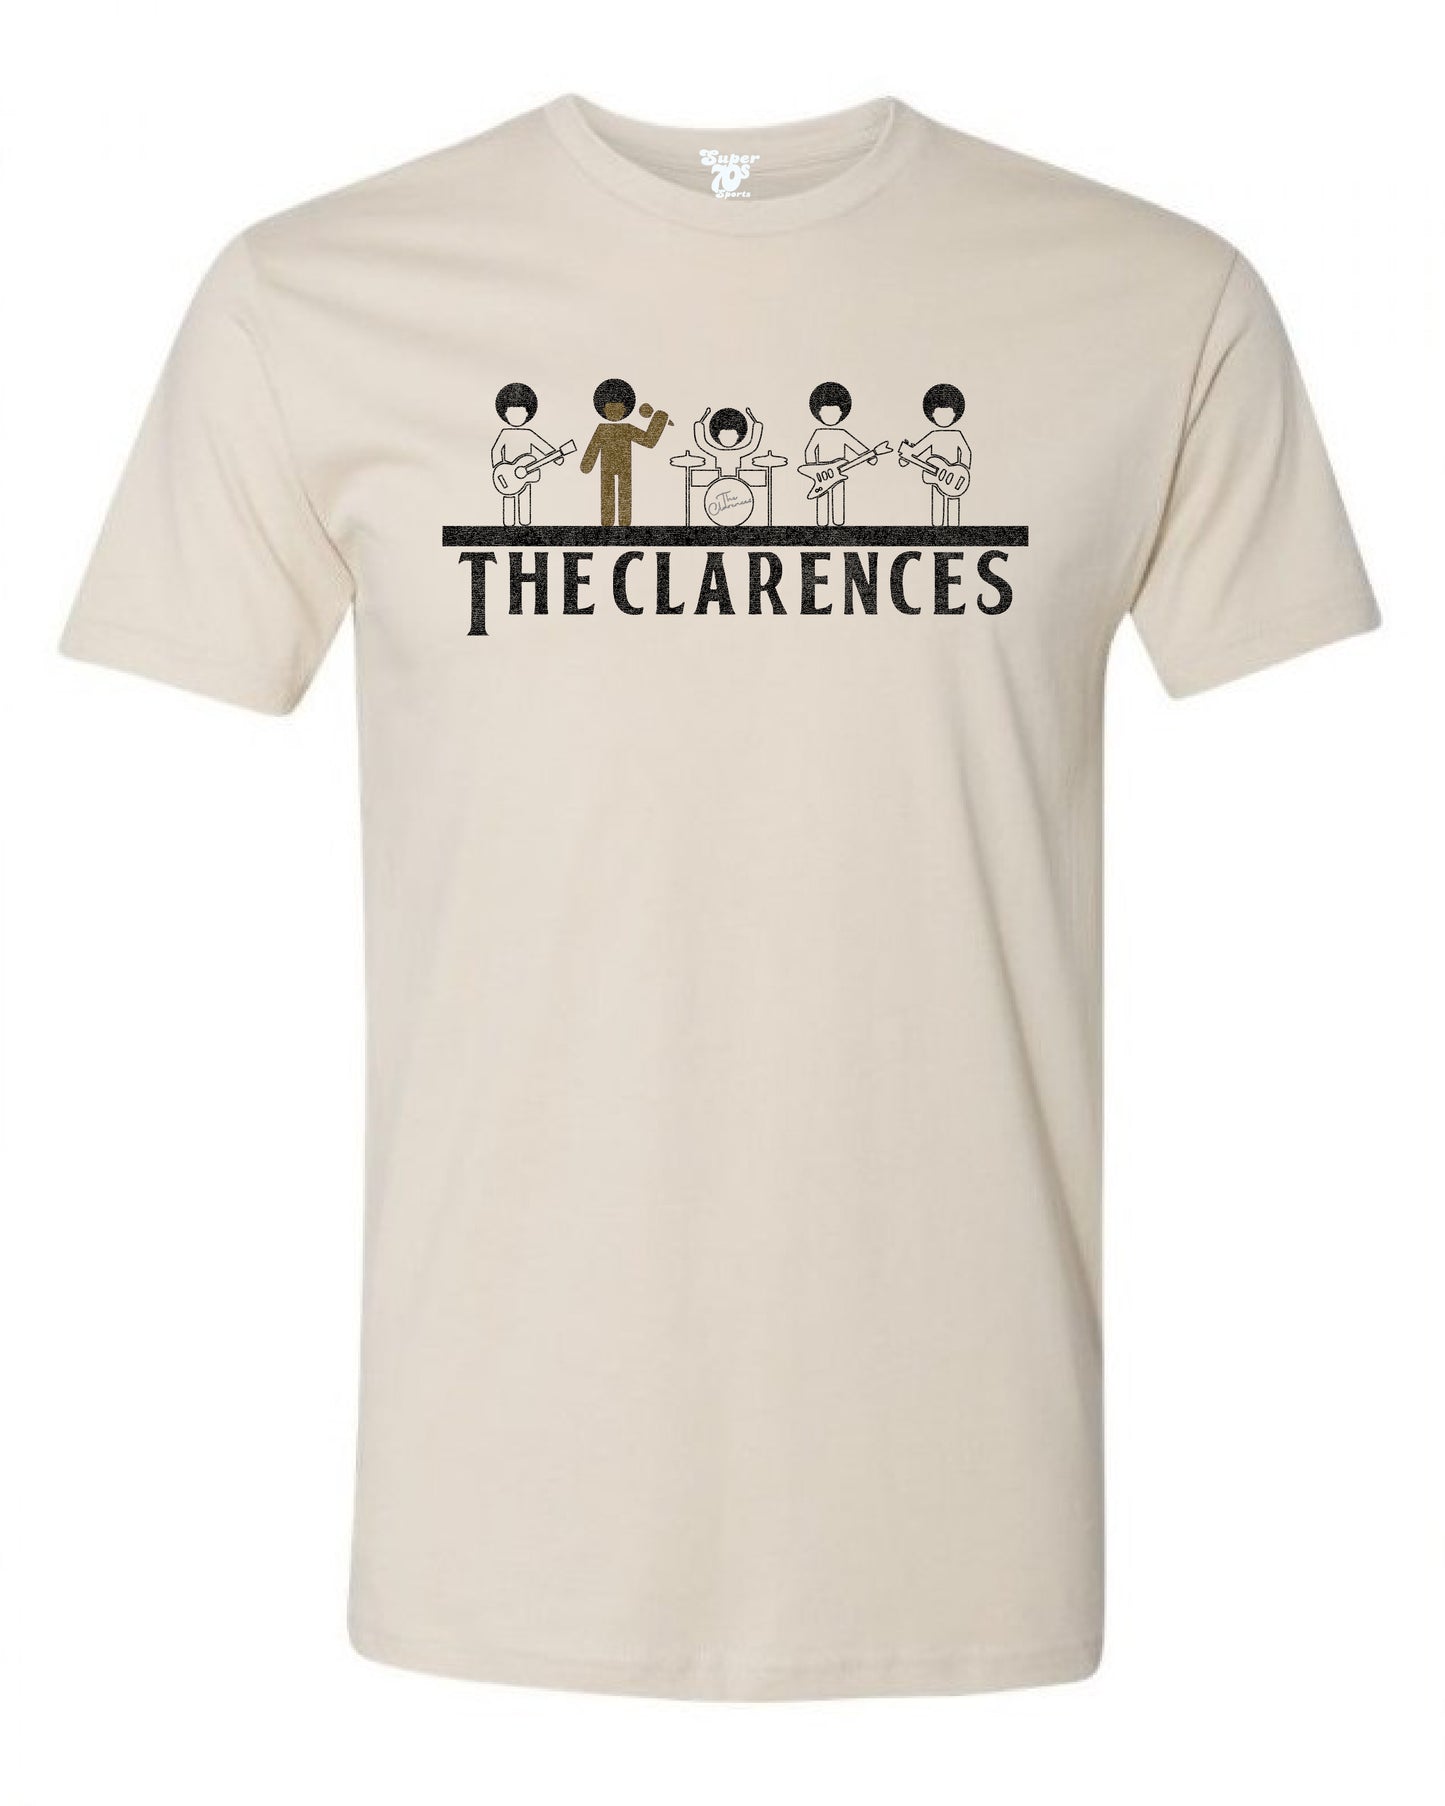 The Clarences Tee